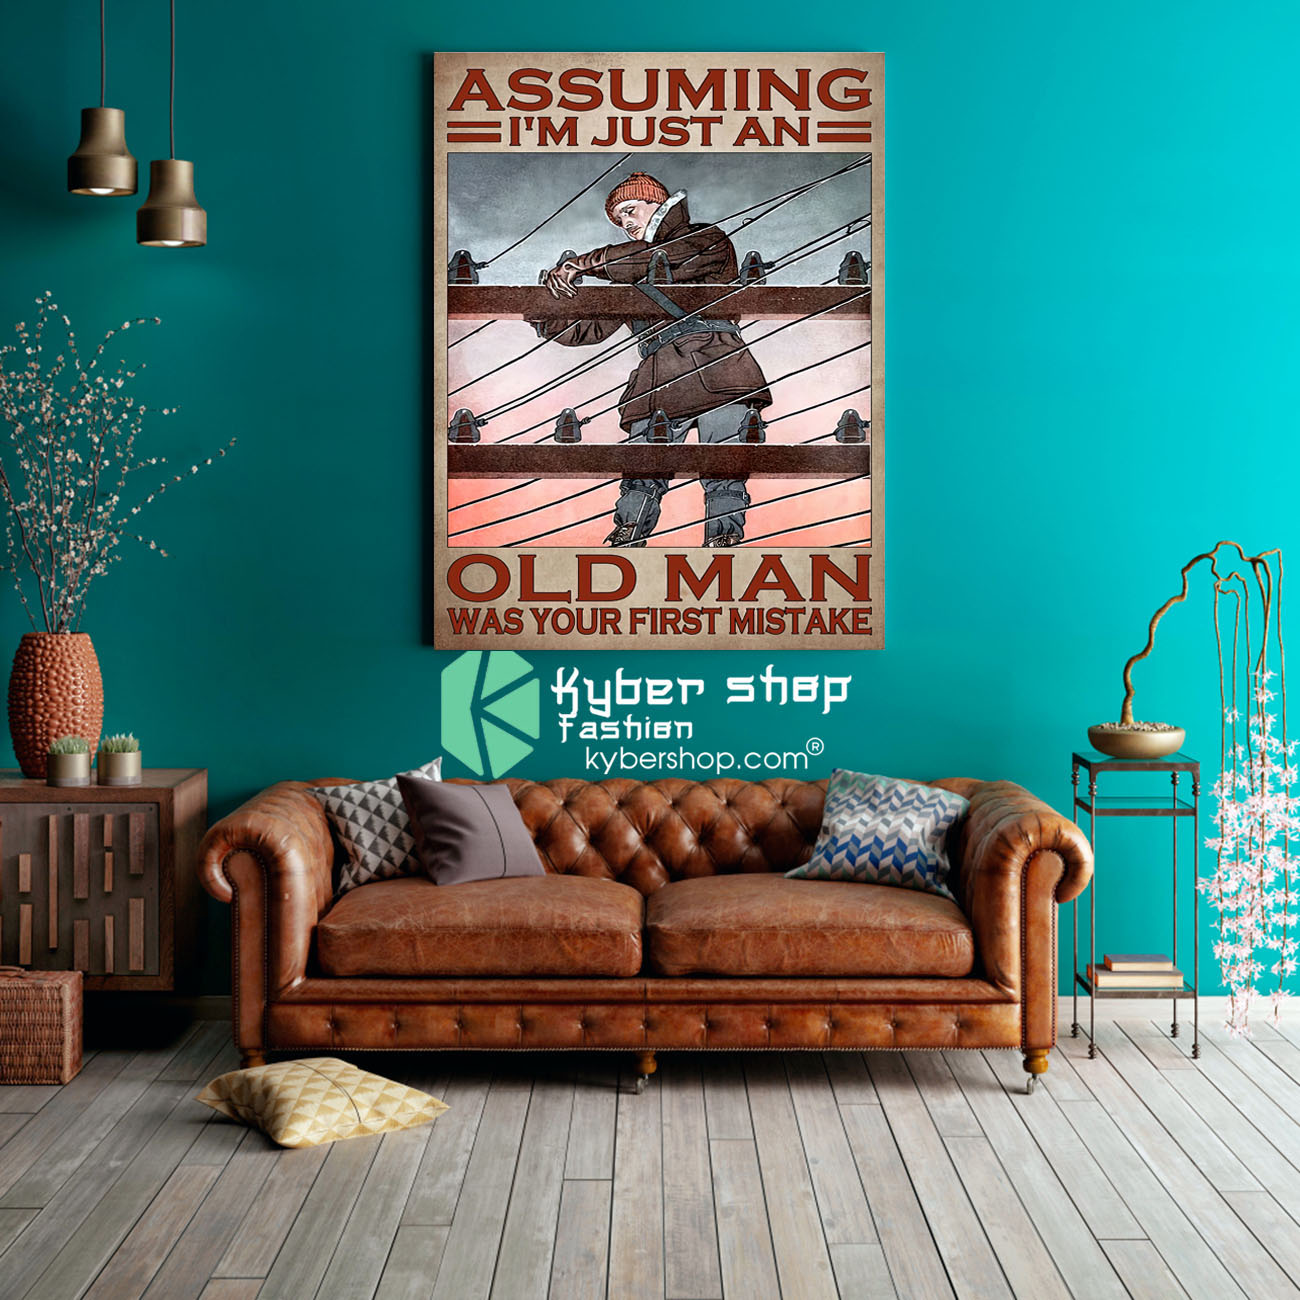 Lineman Assuming im just an old man was your first mistake poster 3